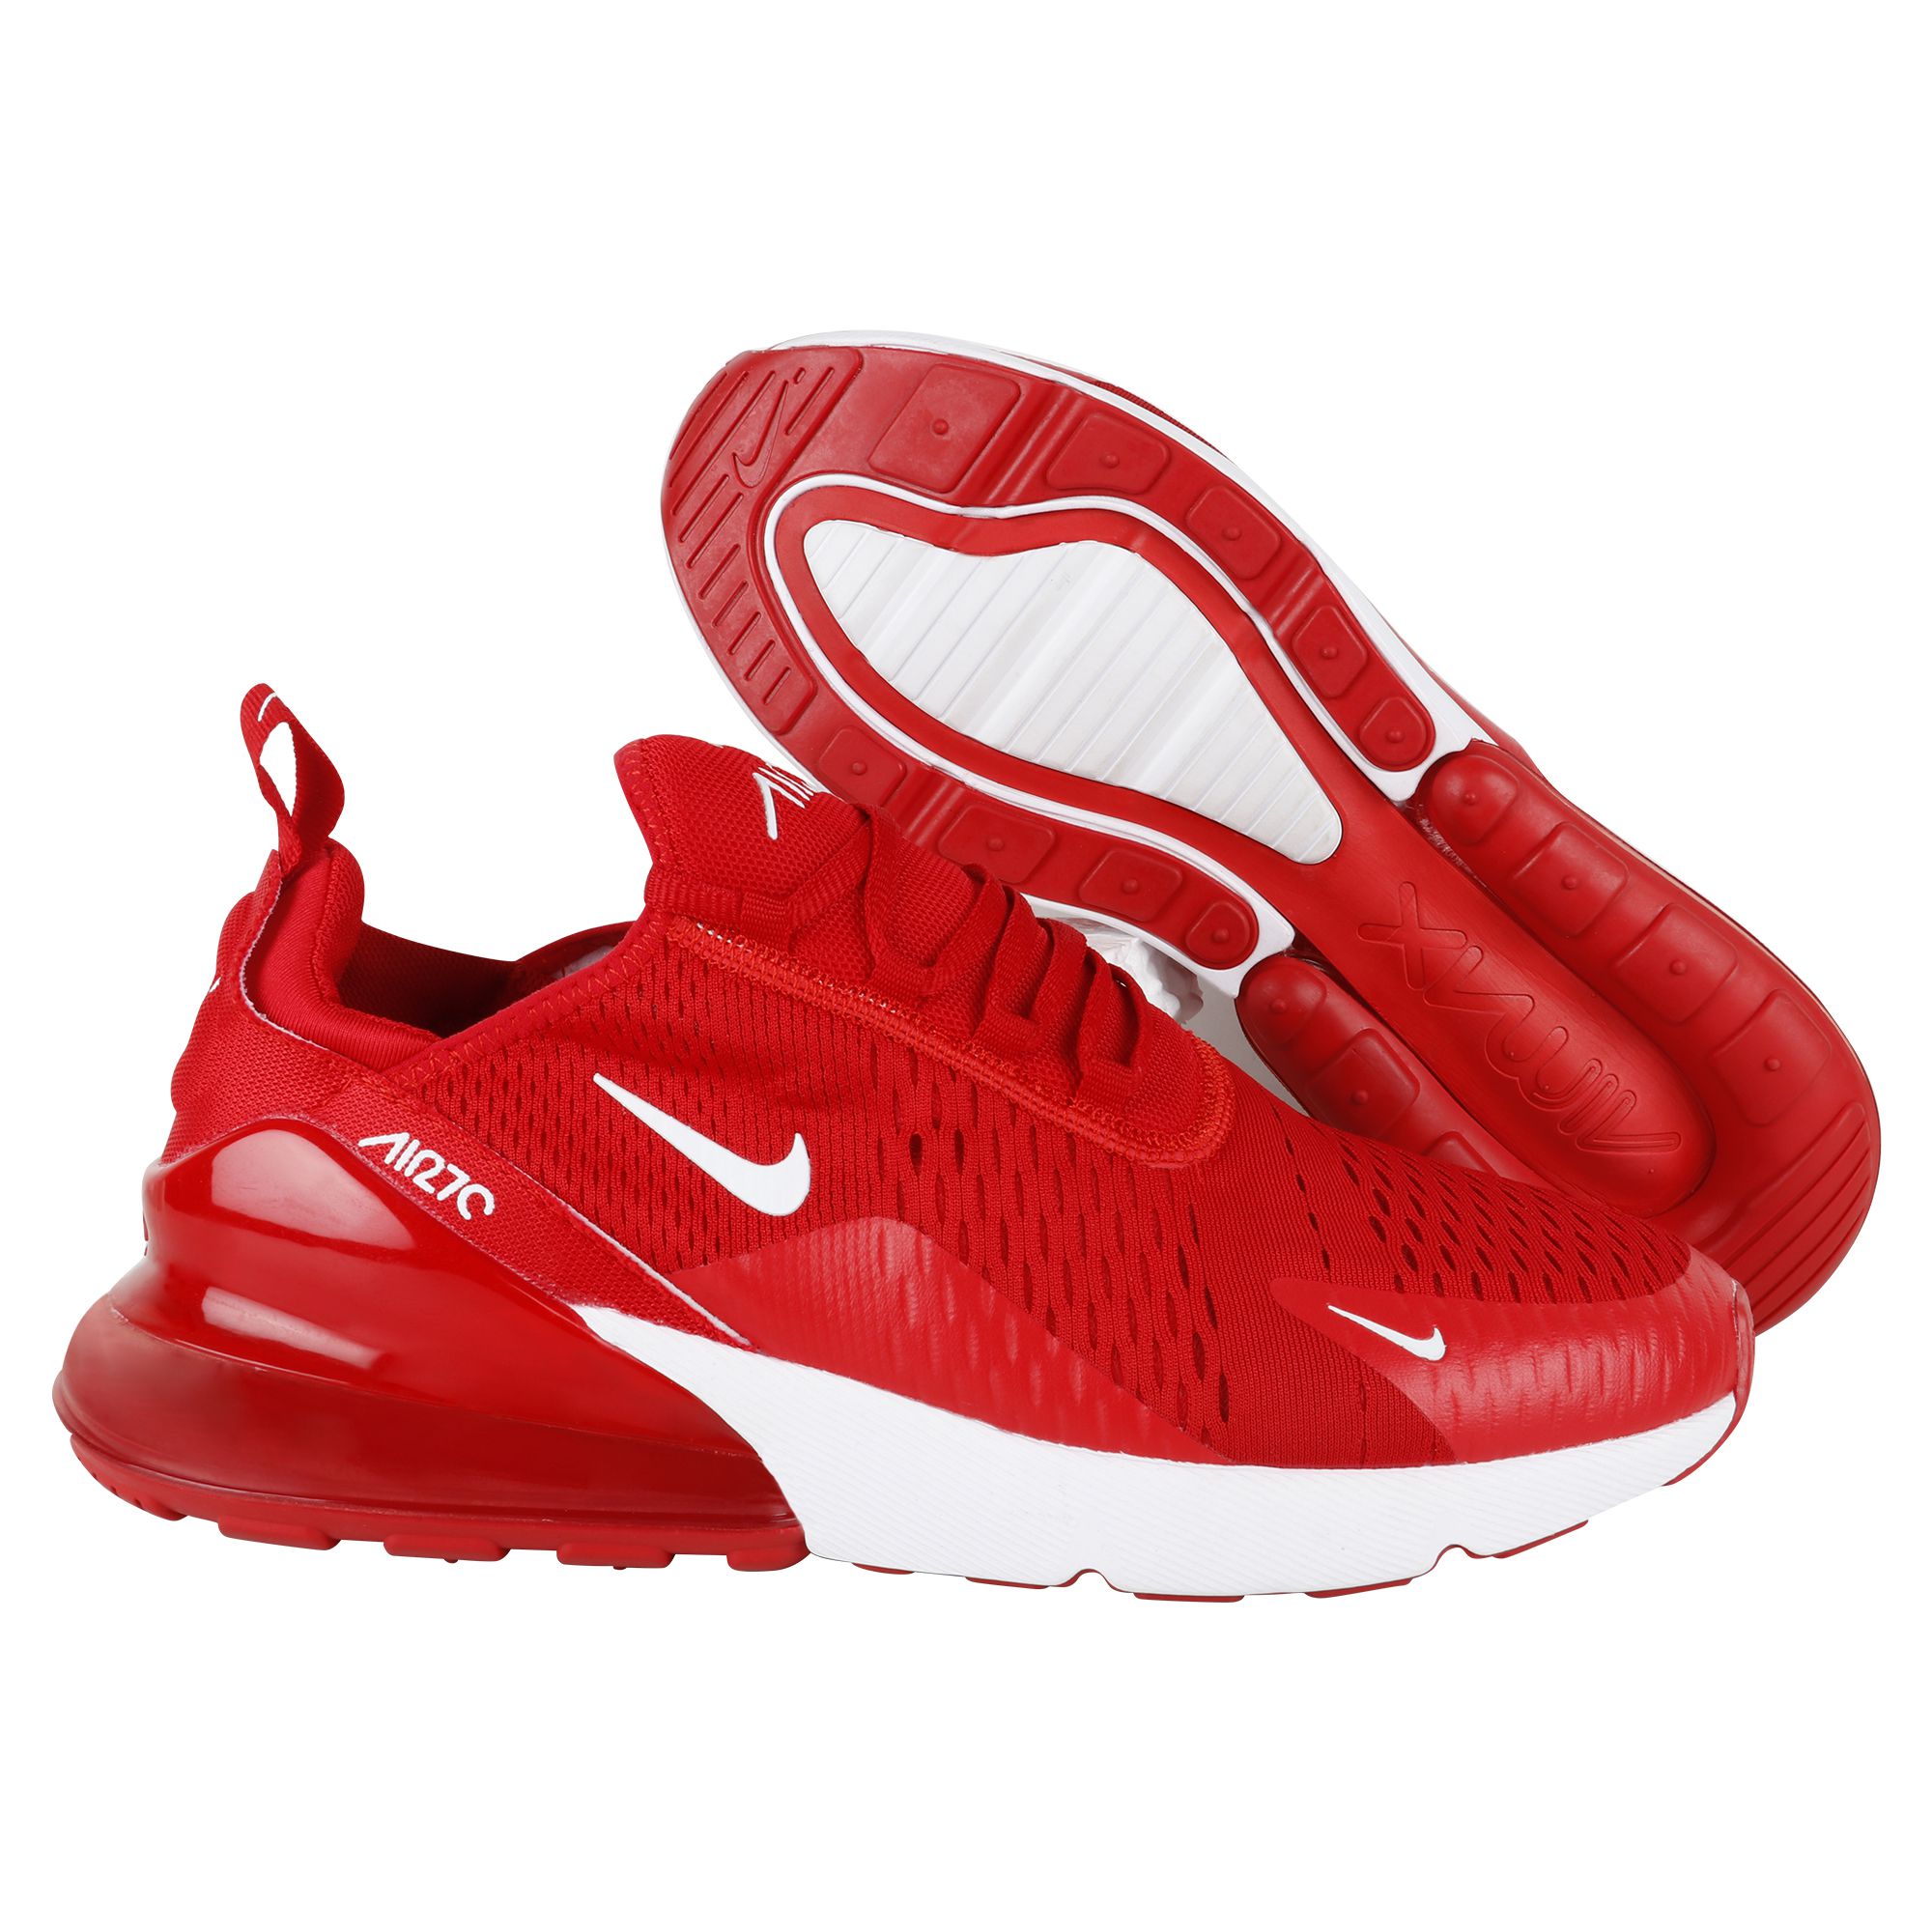 Buy Nike Air Max 270 Red Running Shoe Online @ ₹2899 from ShopClues